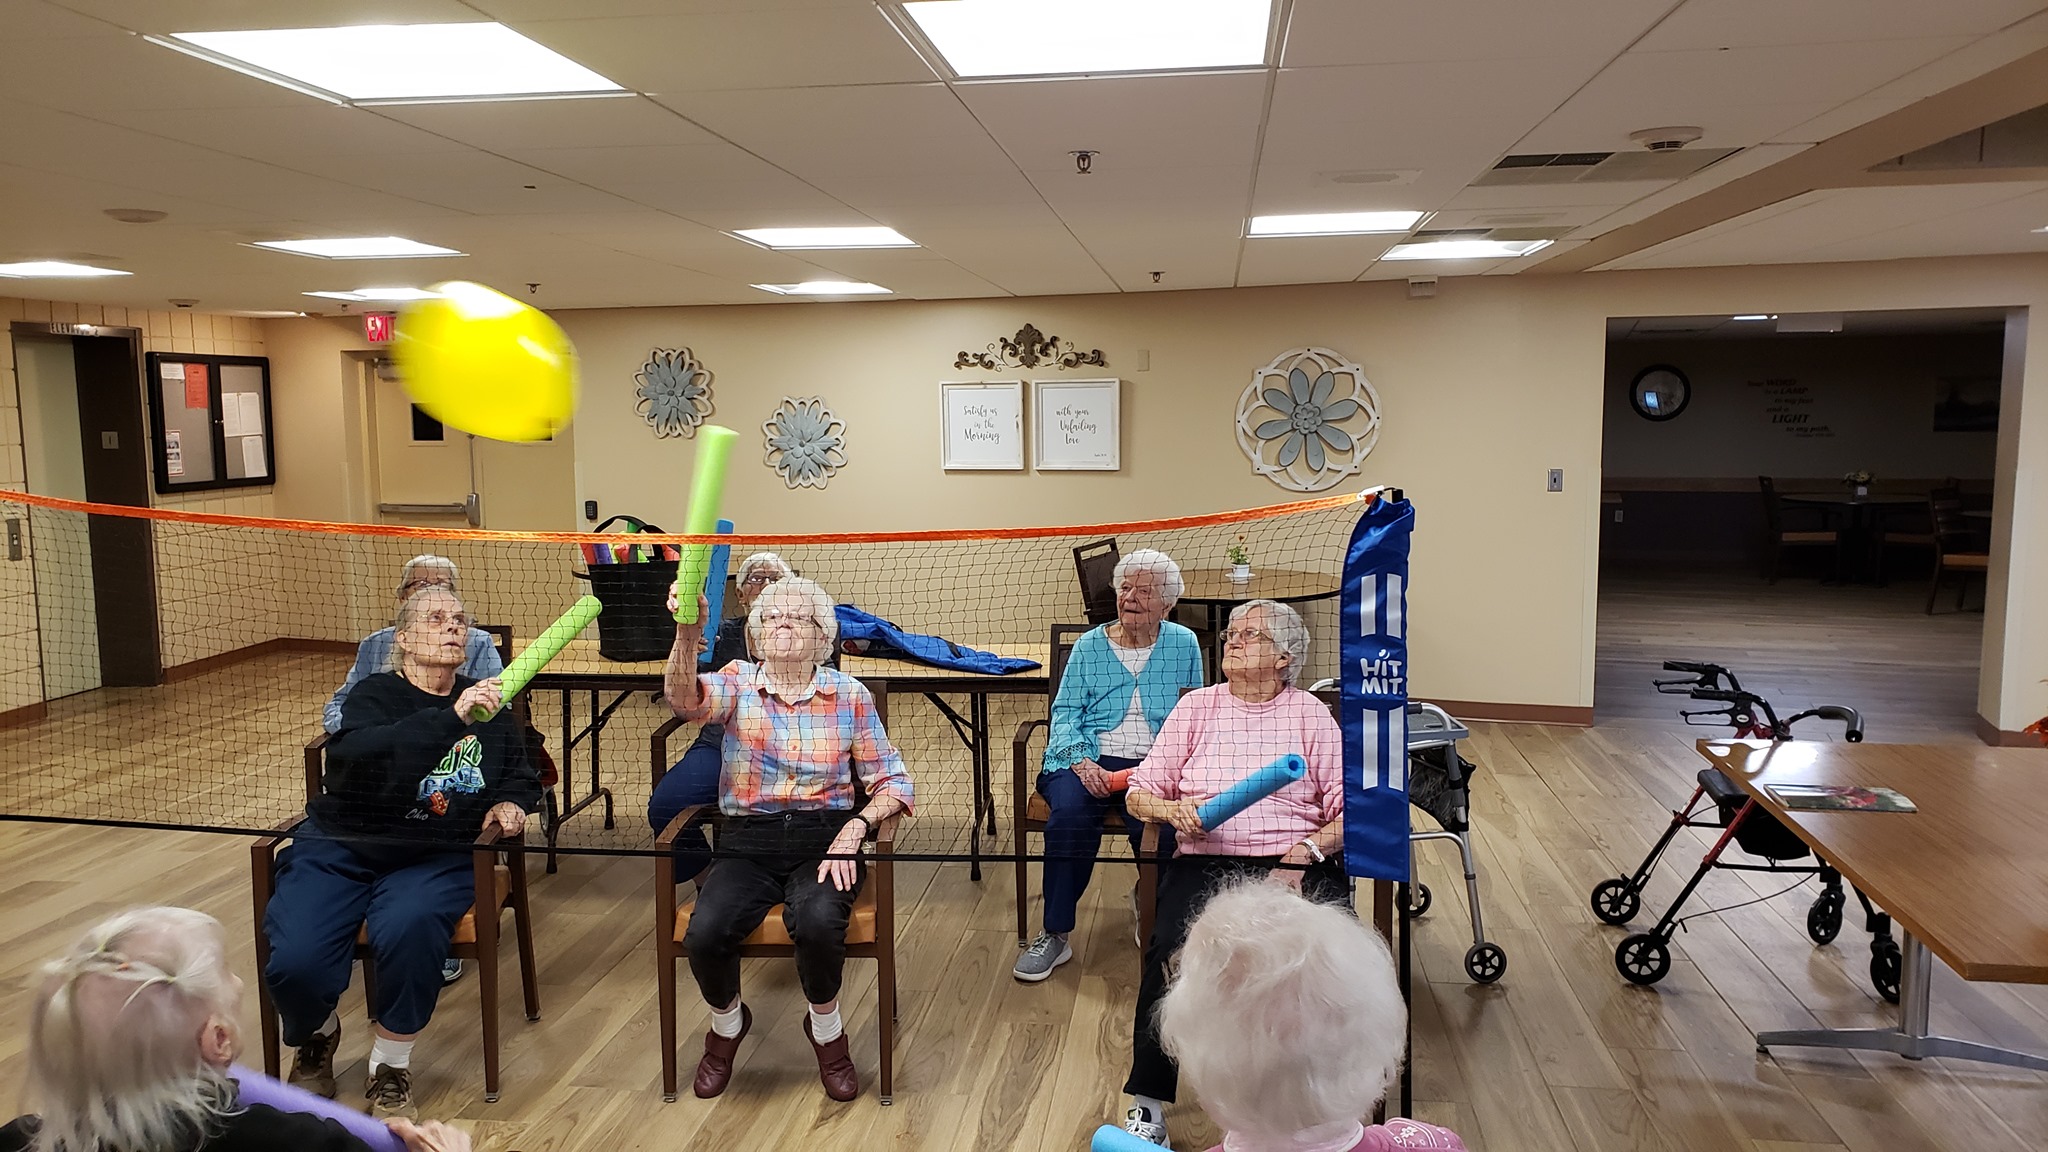 Pine Haven Christian Communities residents playing balloon volleyball as art of a daily activity